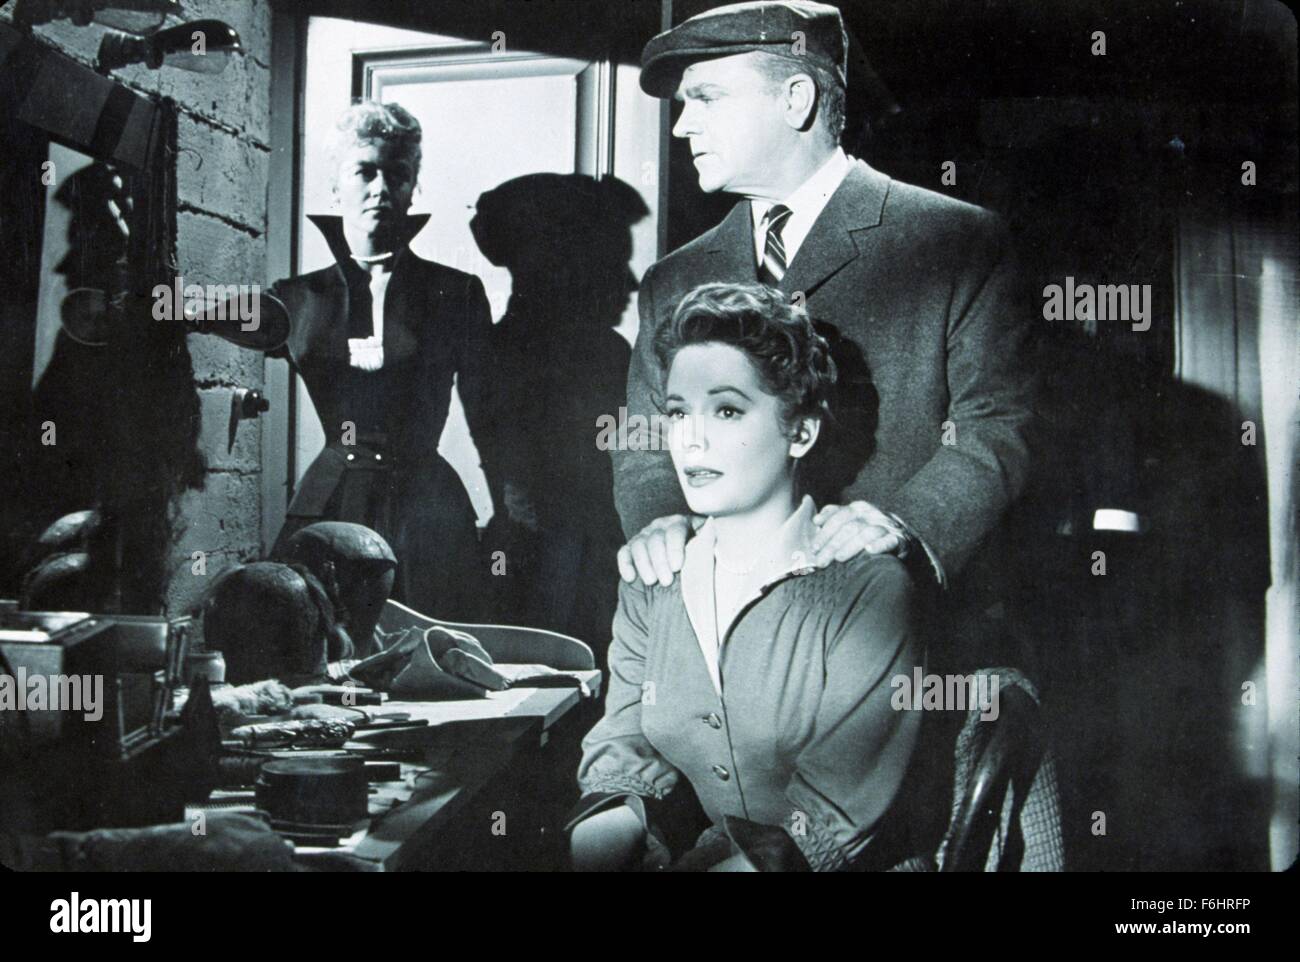 1957, Film Title: MAN OF A THOUSAND FACES, Director: JOSEPH PEVNEY, Studio: UNIV, Pictured: JAMES CAGNEY, CHARACTER, JANE GREER, LON CHANEY: ACTOR, DOROTHY MALONE. (Credit Image: SNAP) Stock Photo